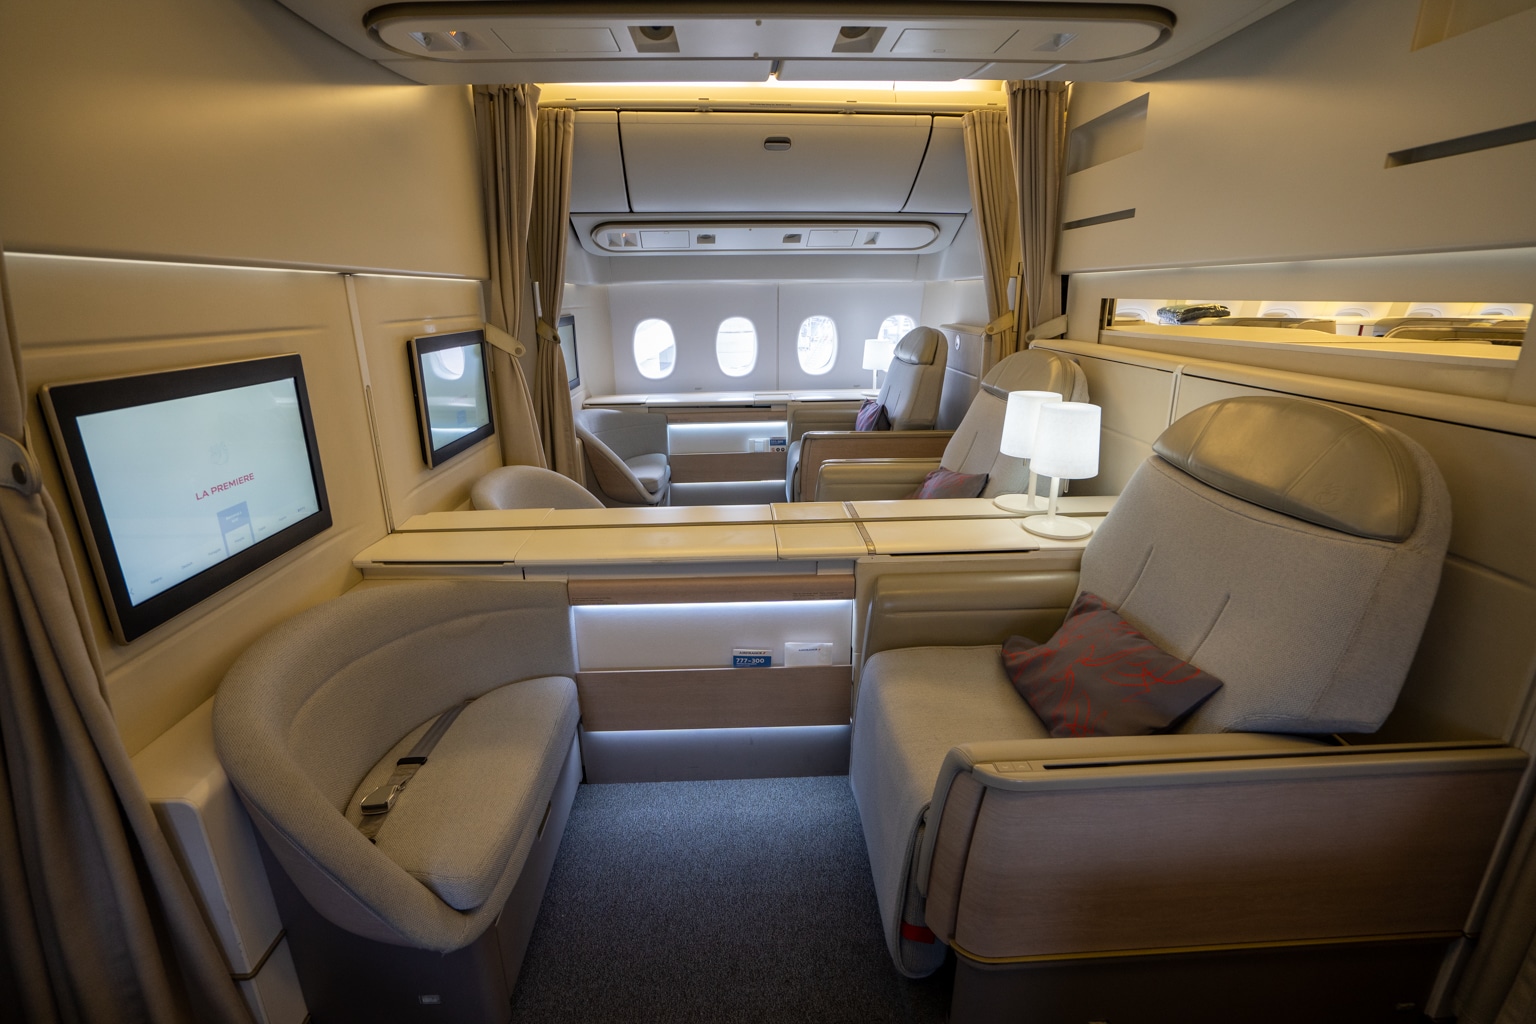 The Complete Guide to Air France La Première | Prince of Travel